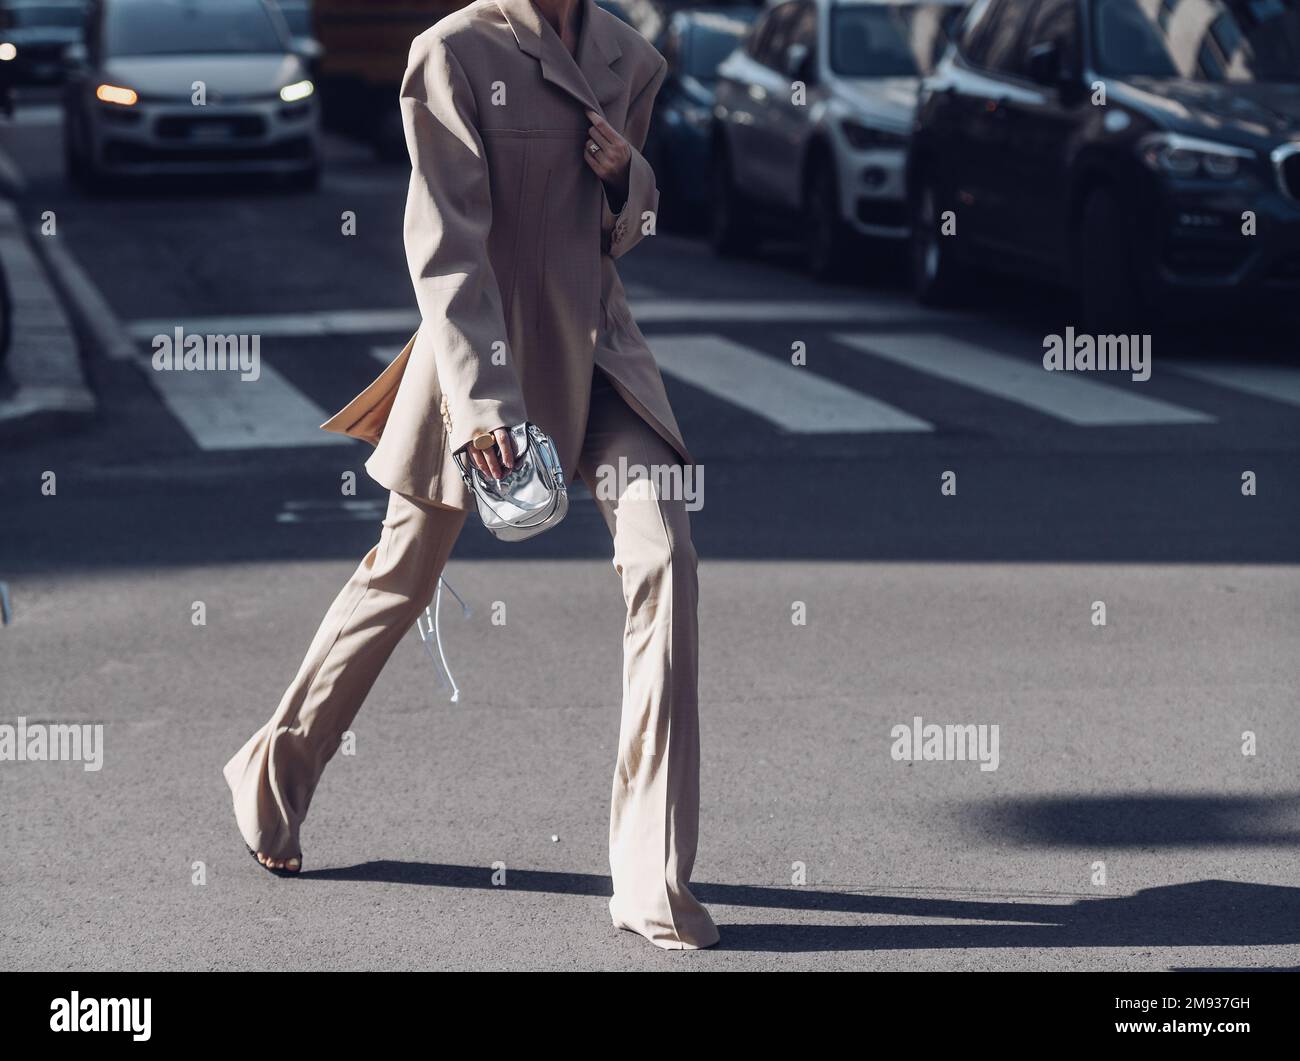 Milan, Italy - February 26, 2022: Woman in stylish beige suit adjusting jacket. Stock Photo